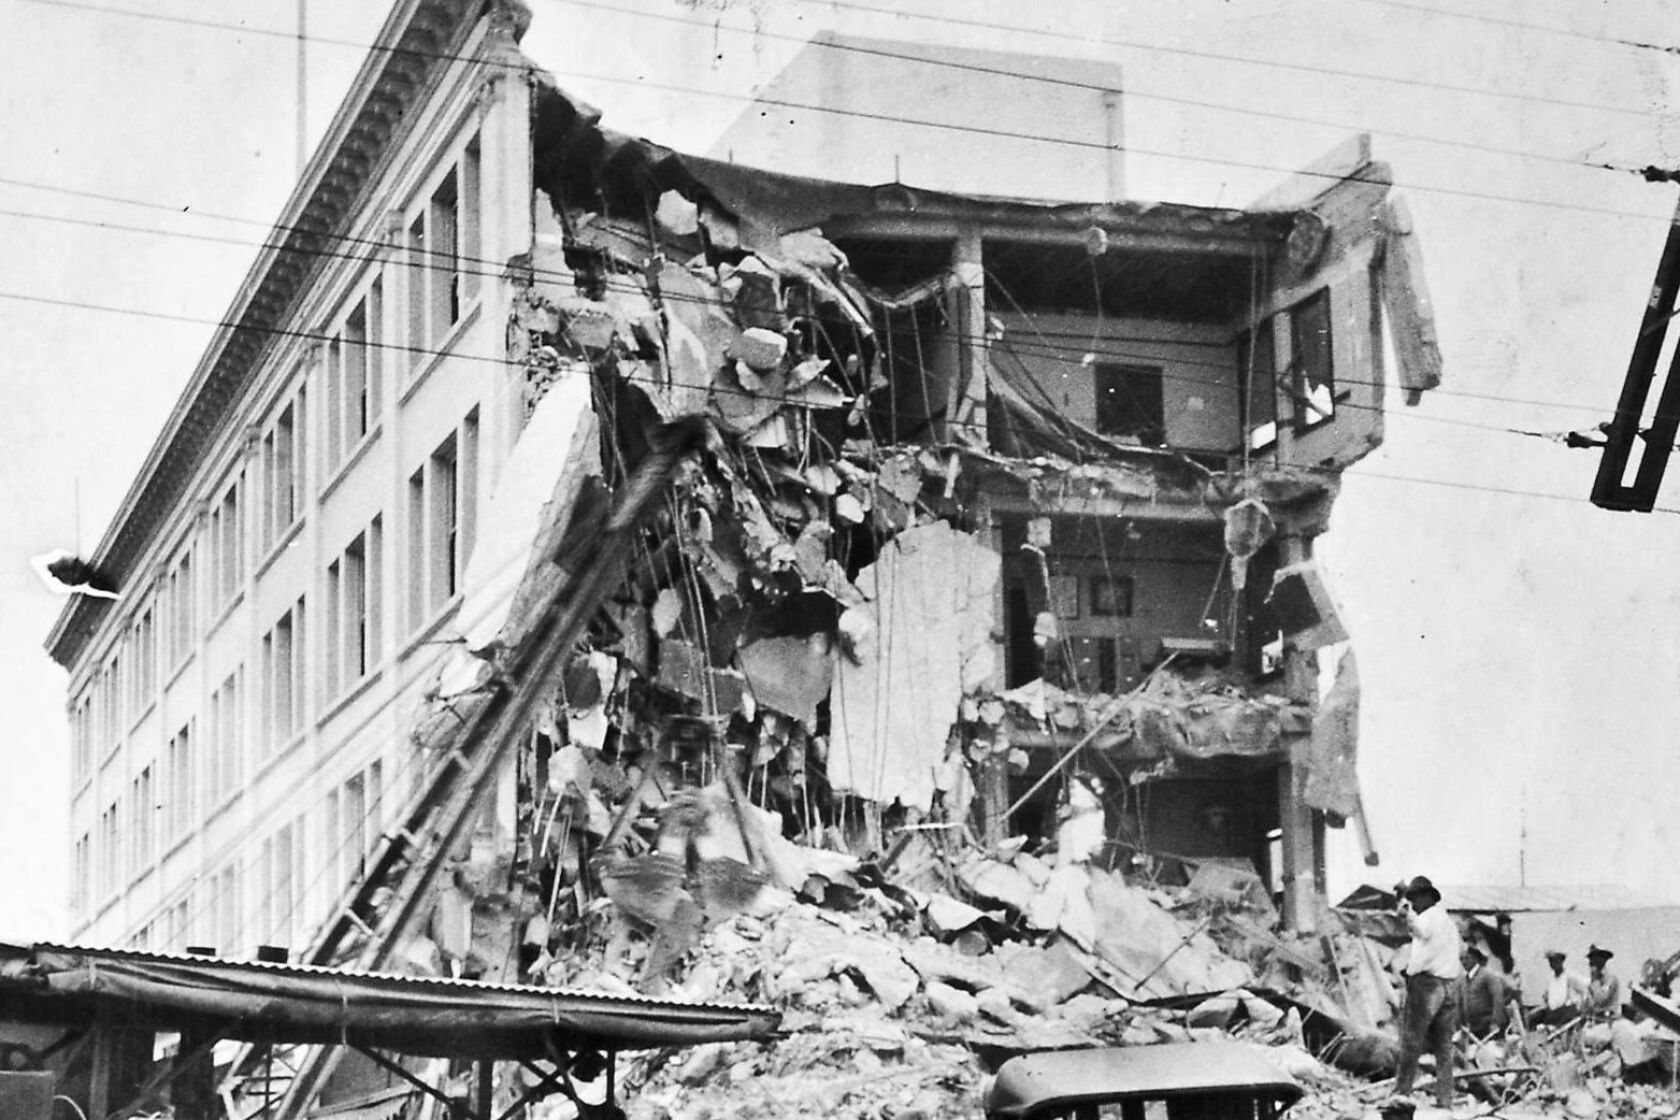 A 6.8 earthquake hit Santa Barbara in June 1925. This is what the